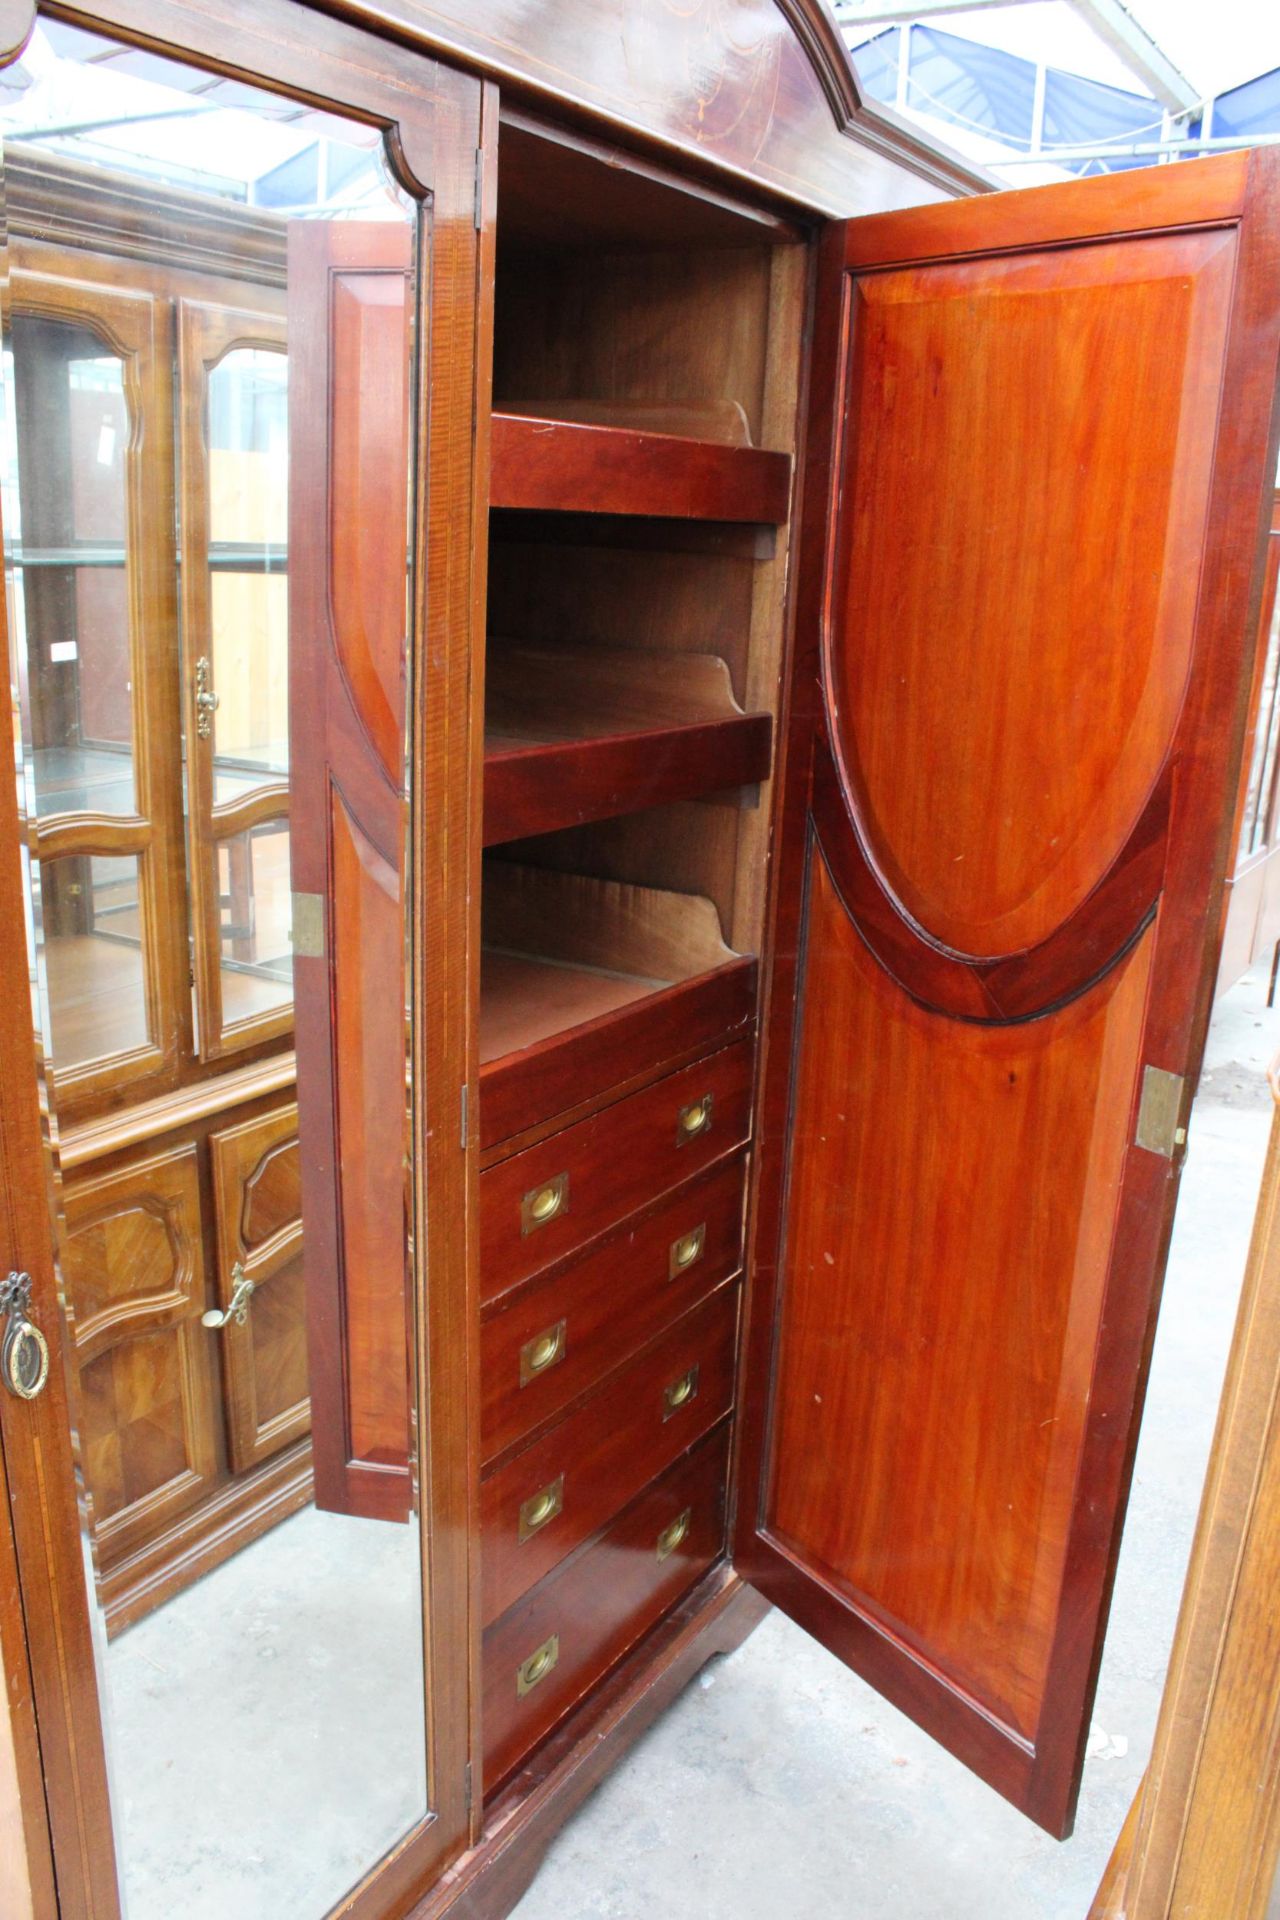 AN EDWARDIAN MAHOGANY AND INLAID DOUBLE MIRROR DOOR WARDROBE 74" WIDE - Image 6 of 9